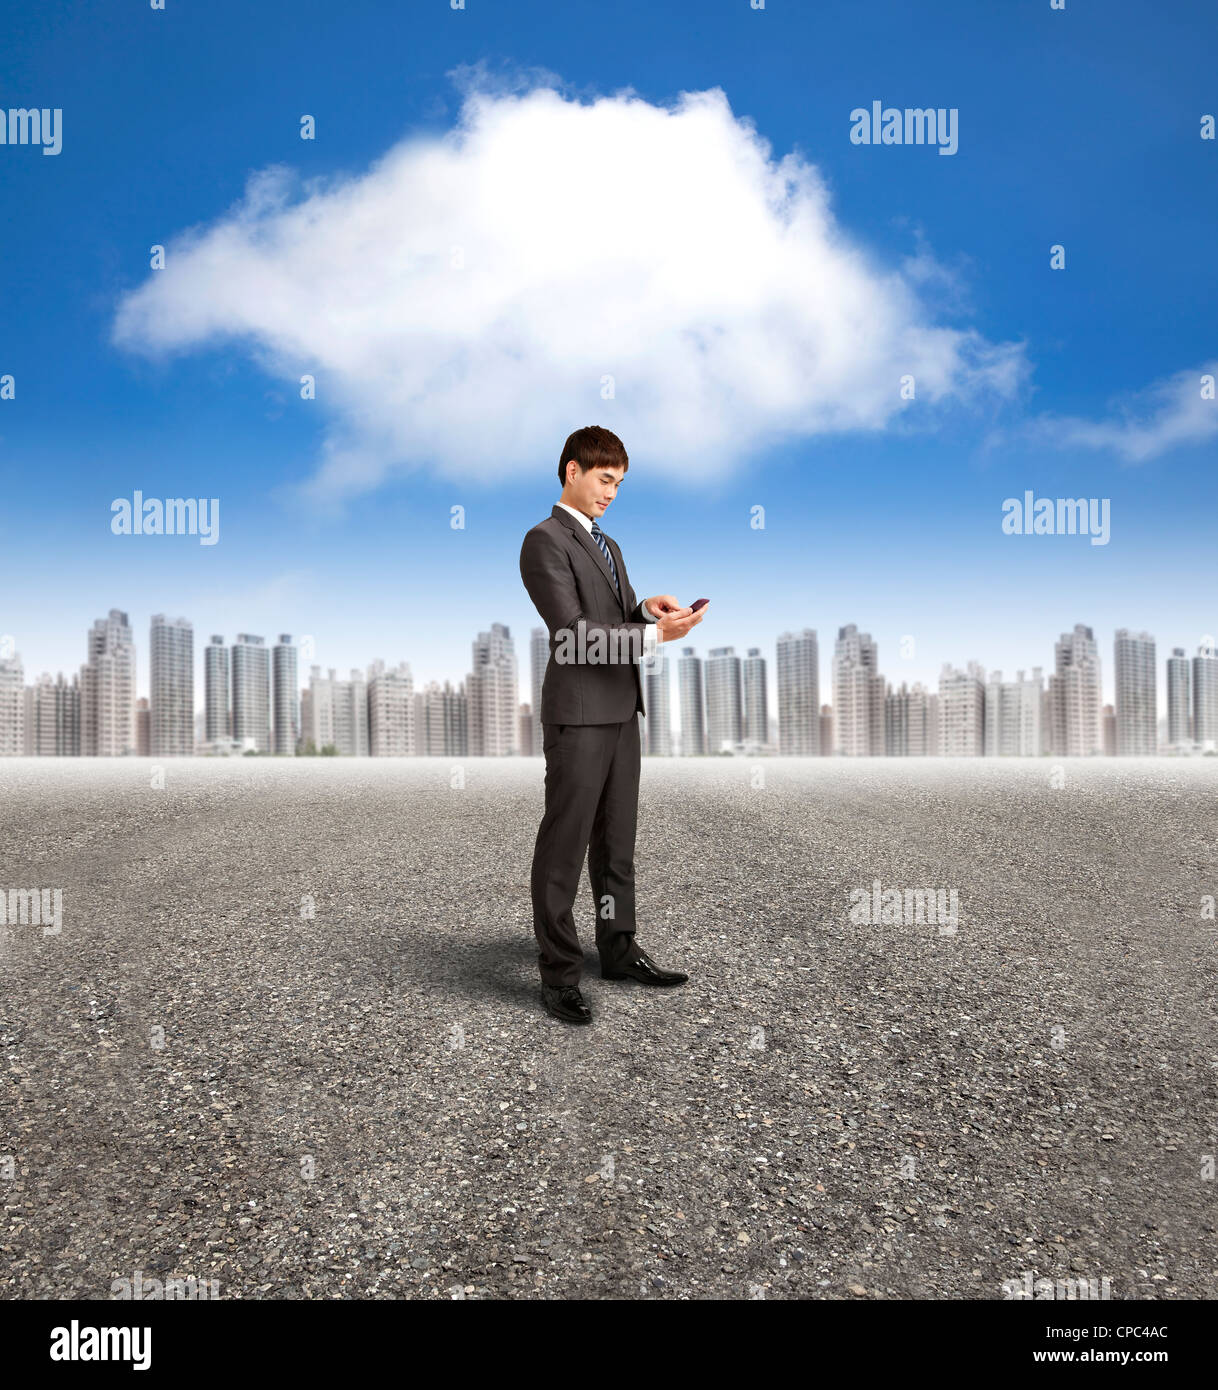 businessman holding smart phone with cloud computing background Stock Photo